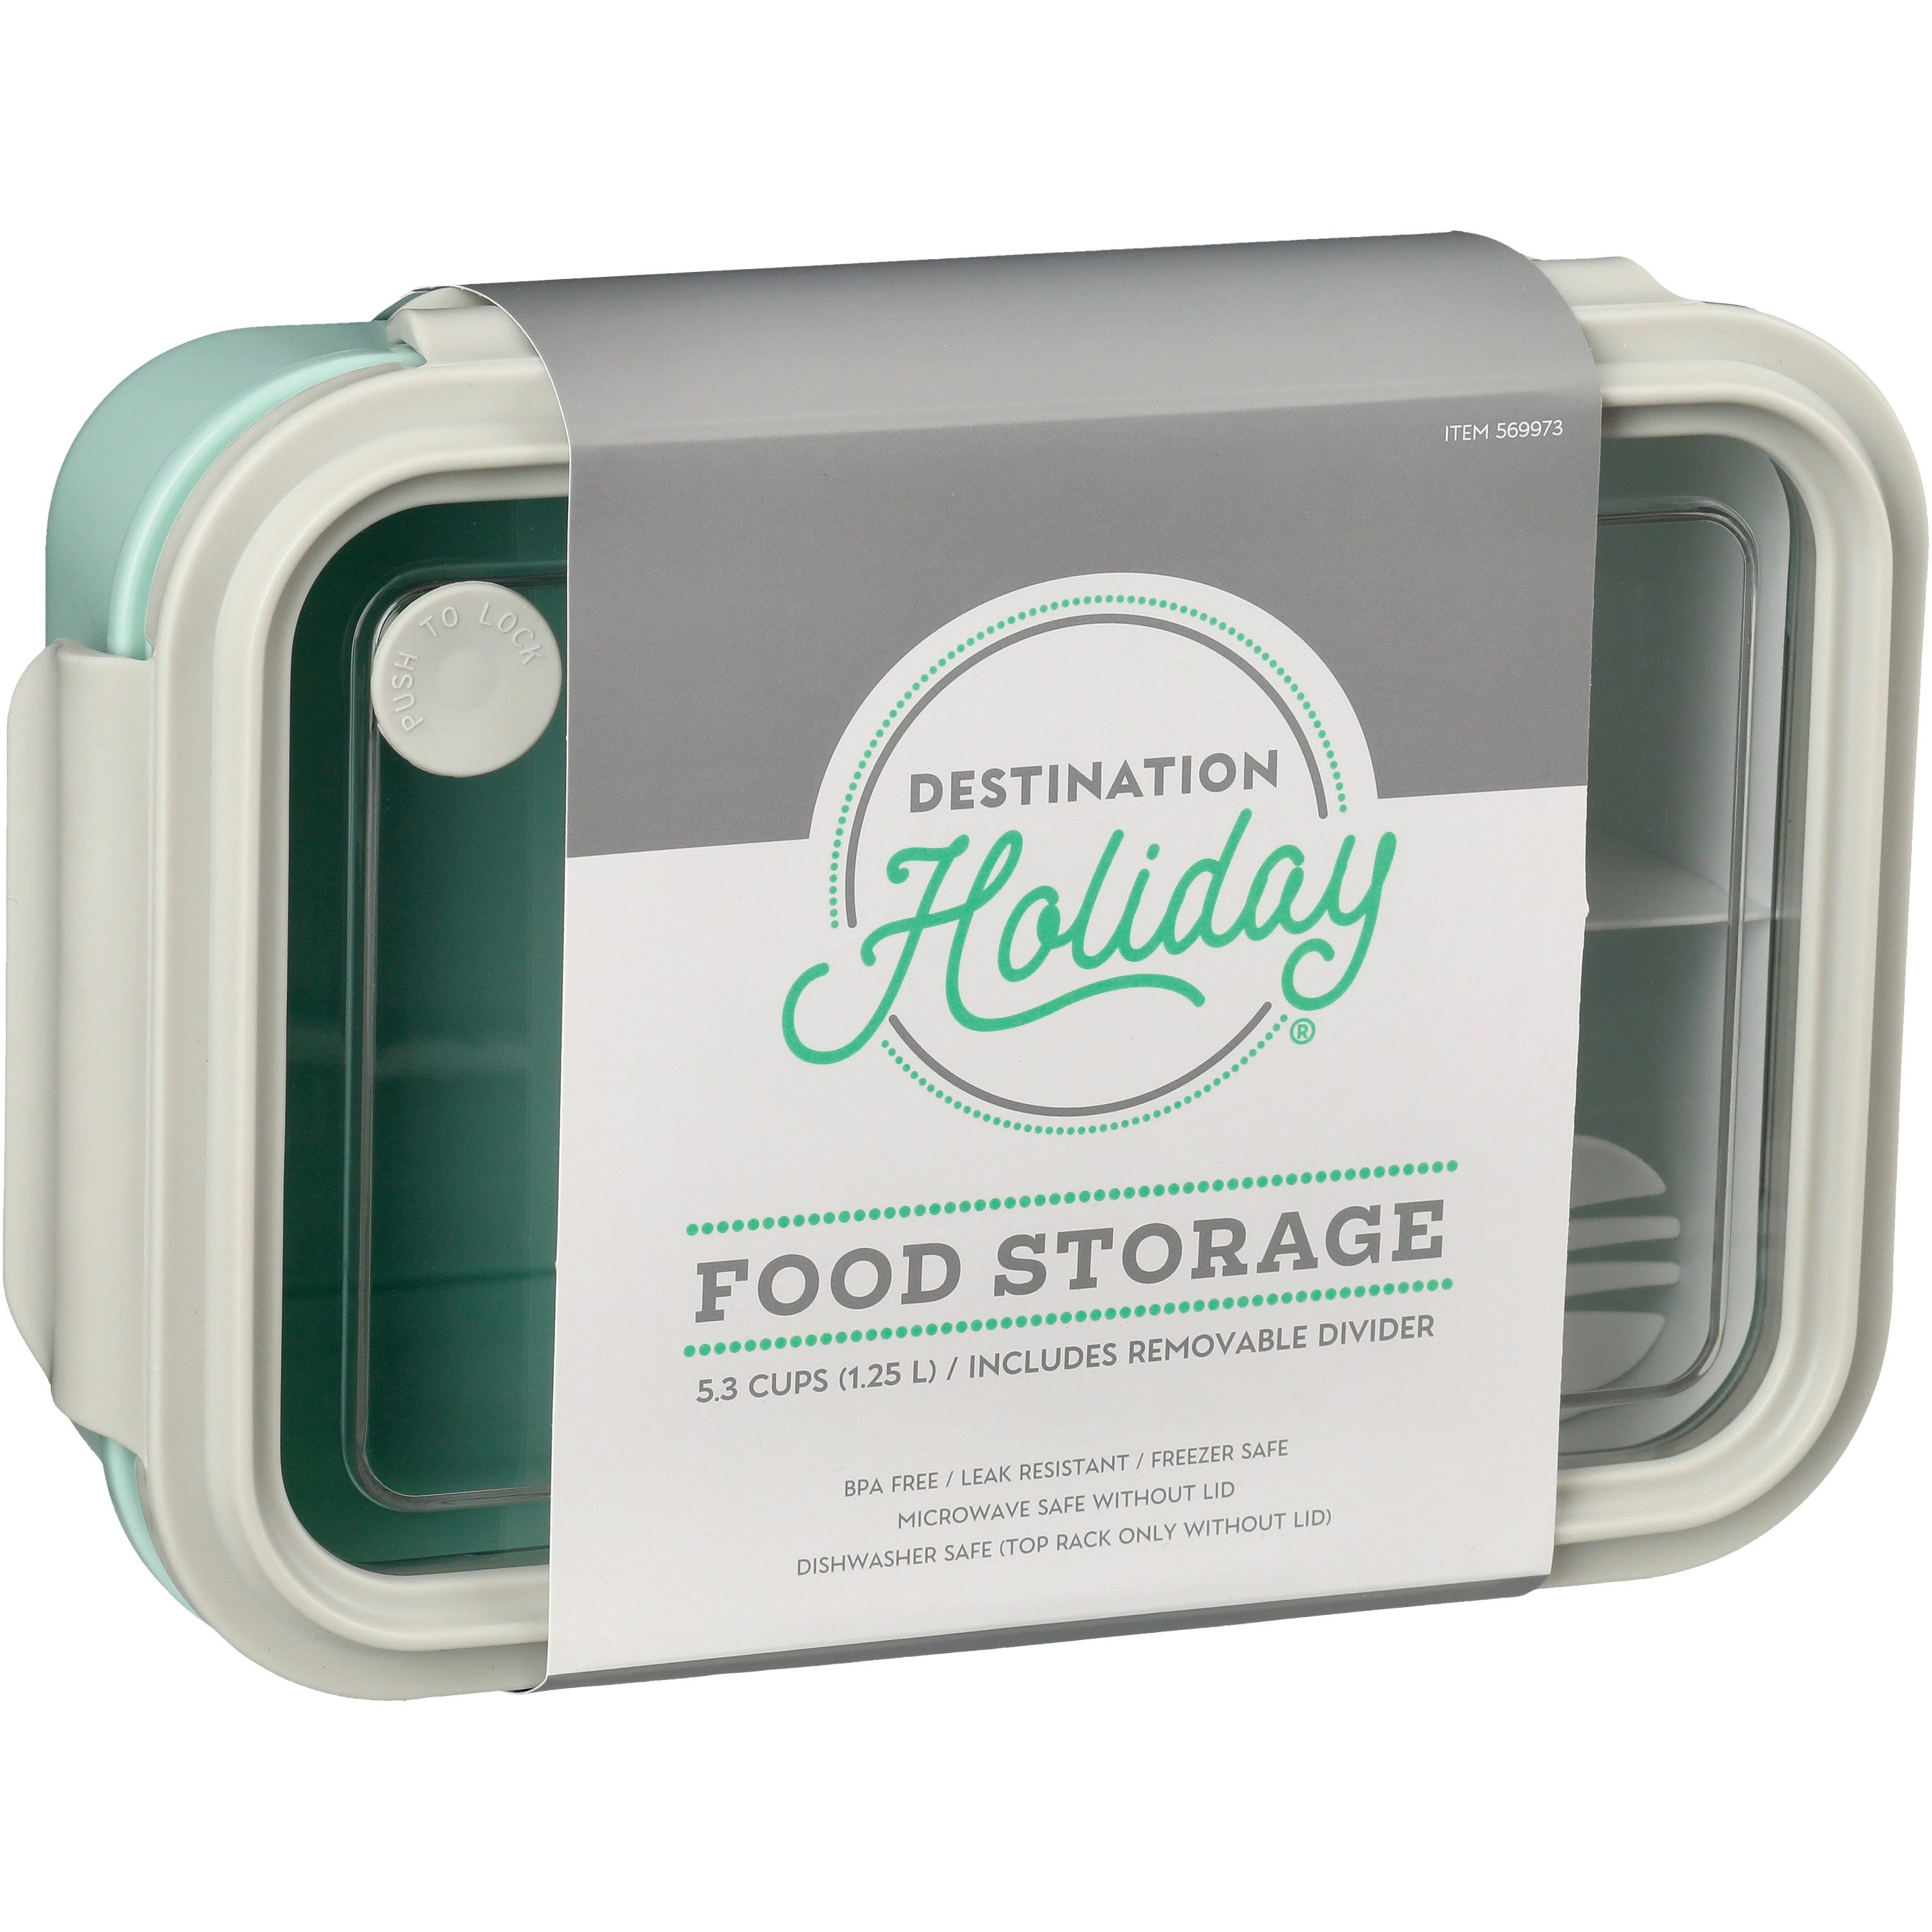 Destination Holiday Plastic Food Storage Container - Green - Shop